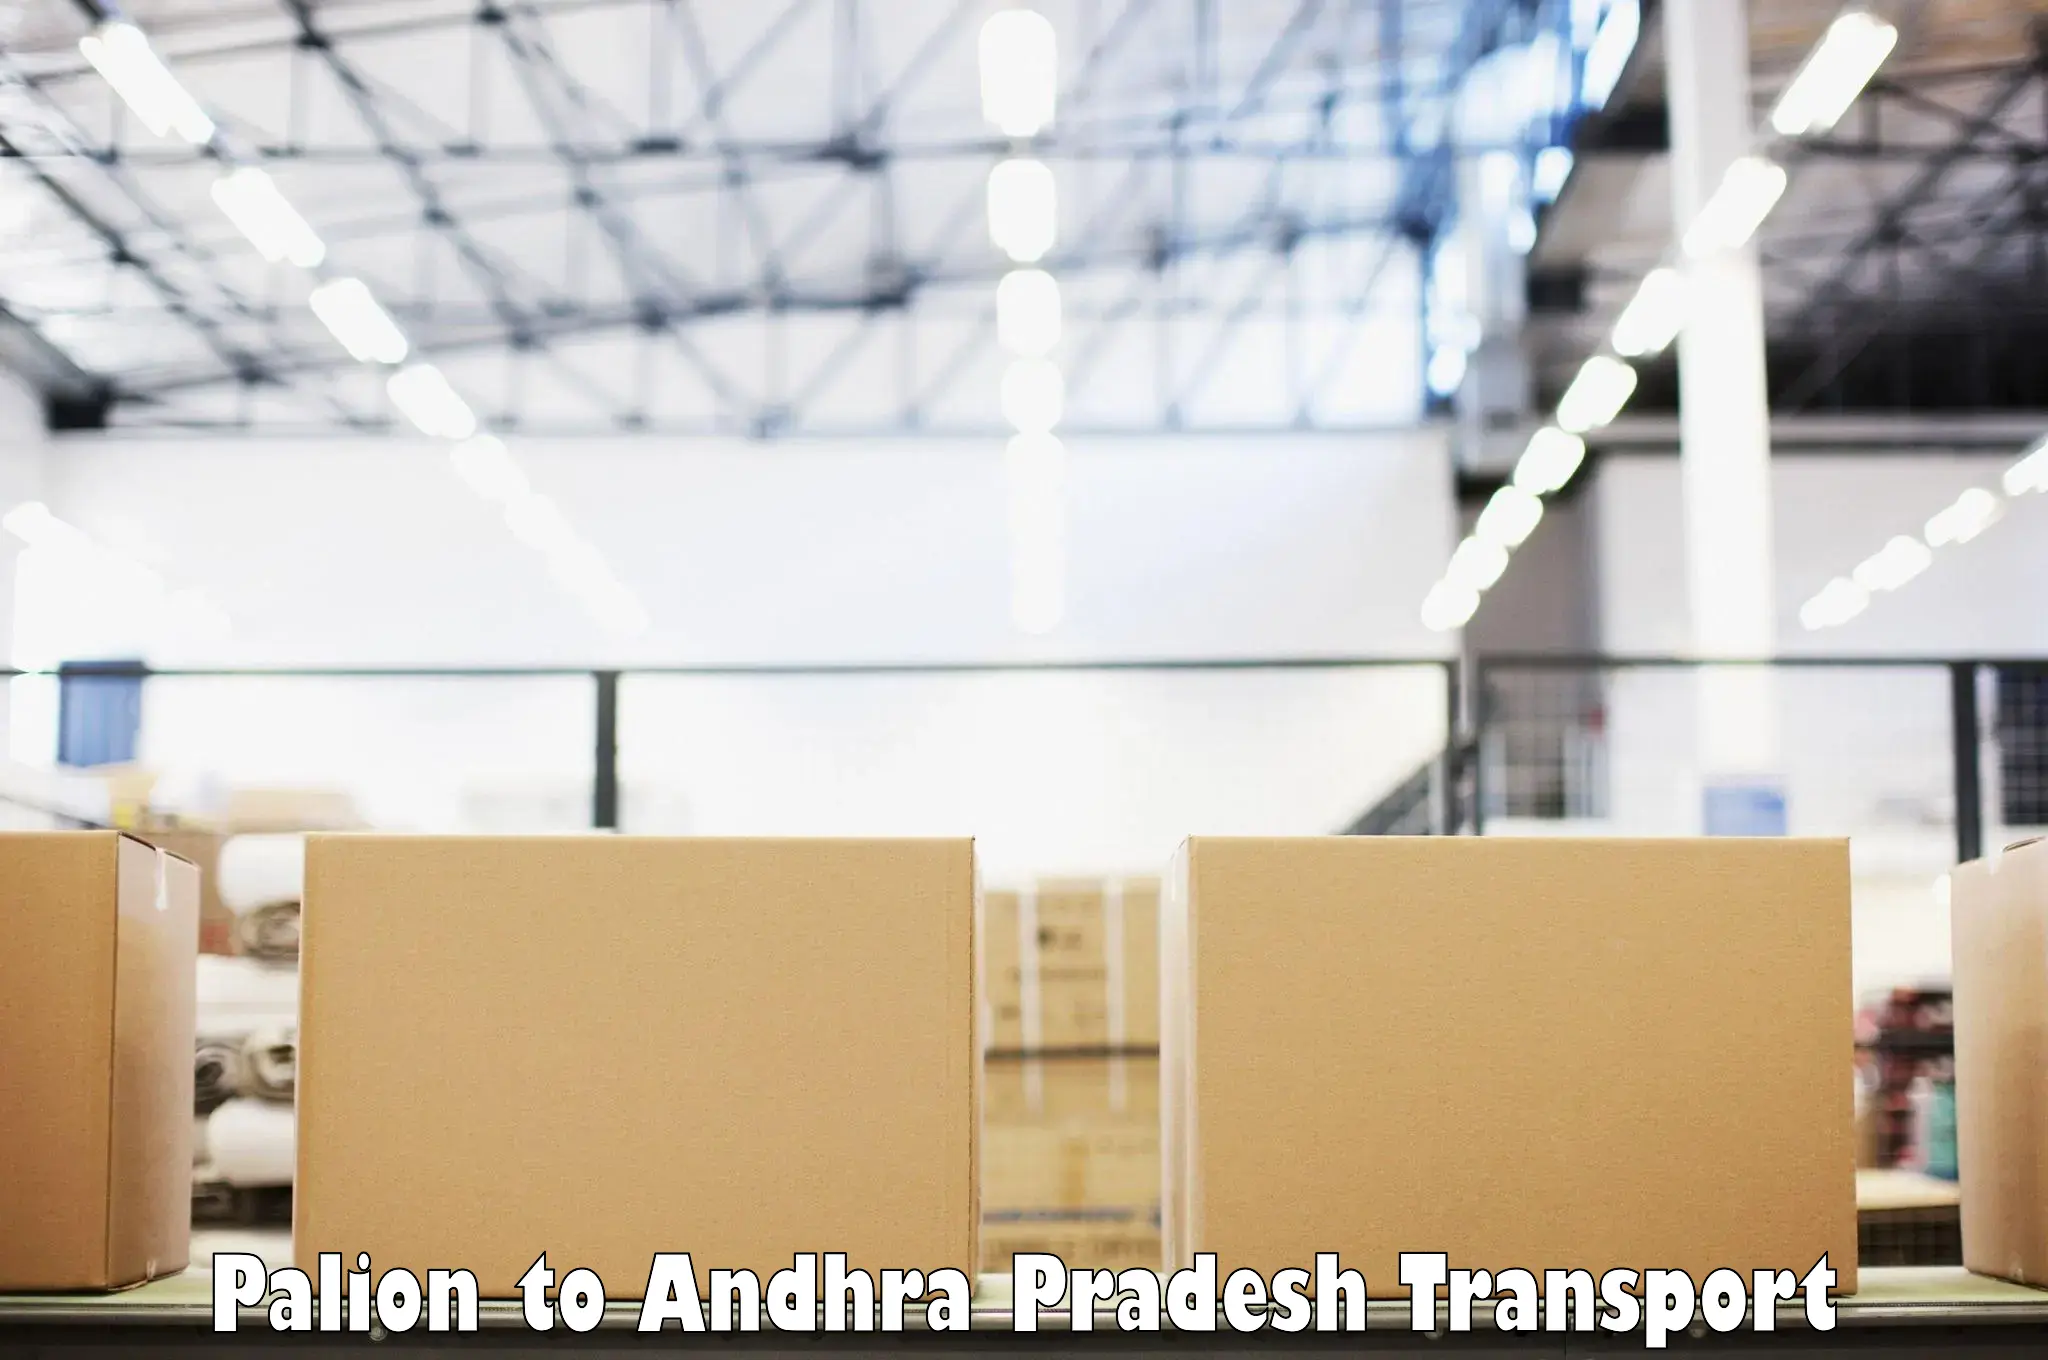 Commercial transport service Palion to Andhra Pradesh